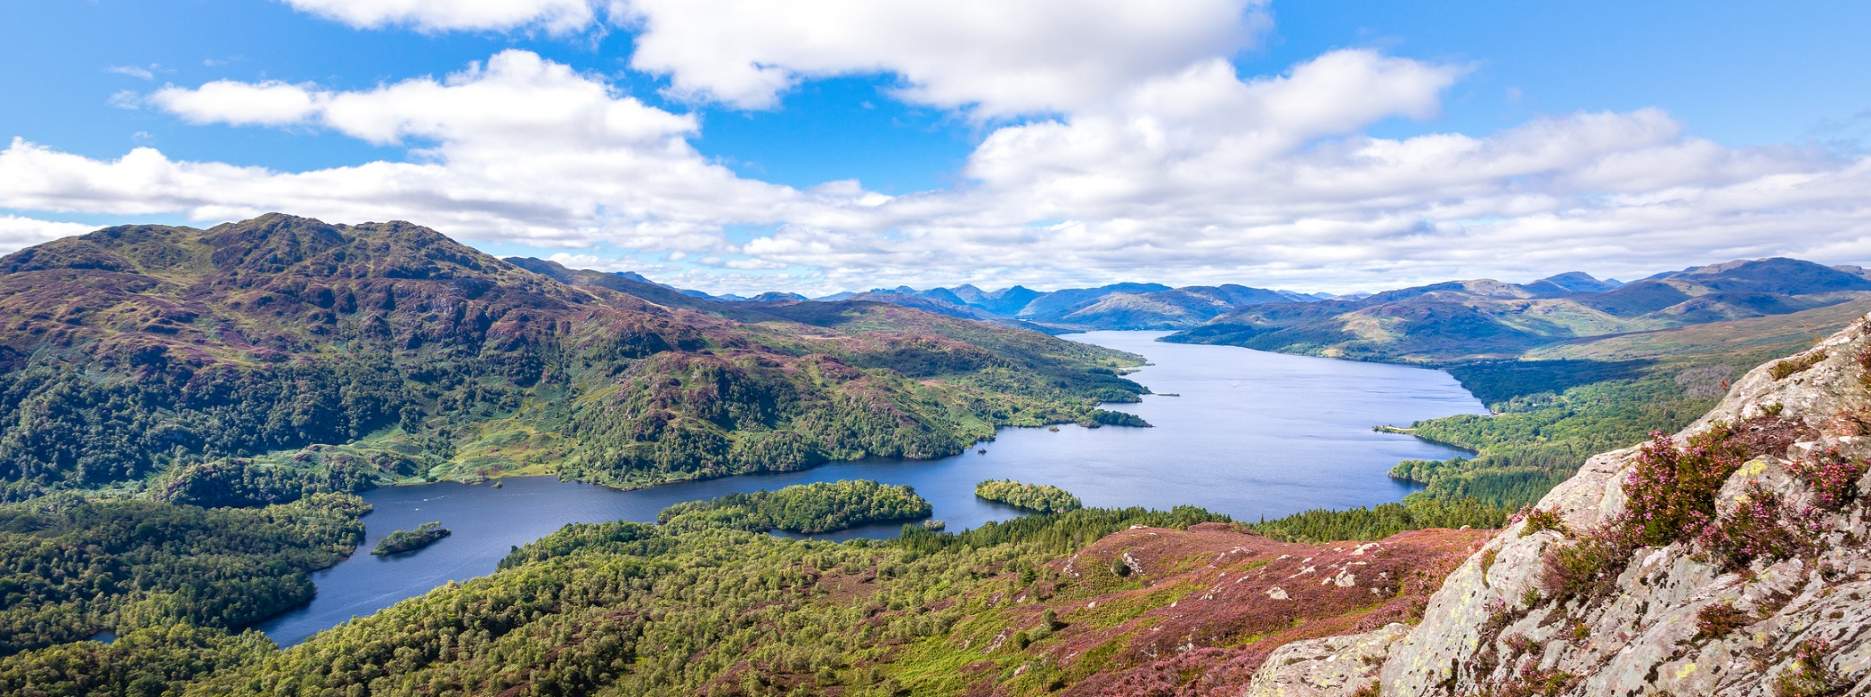 Will a new national park be good news for Scotland?